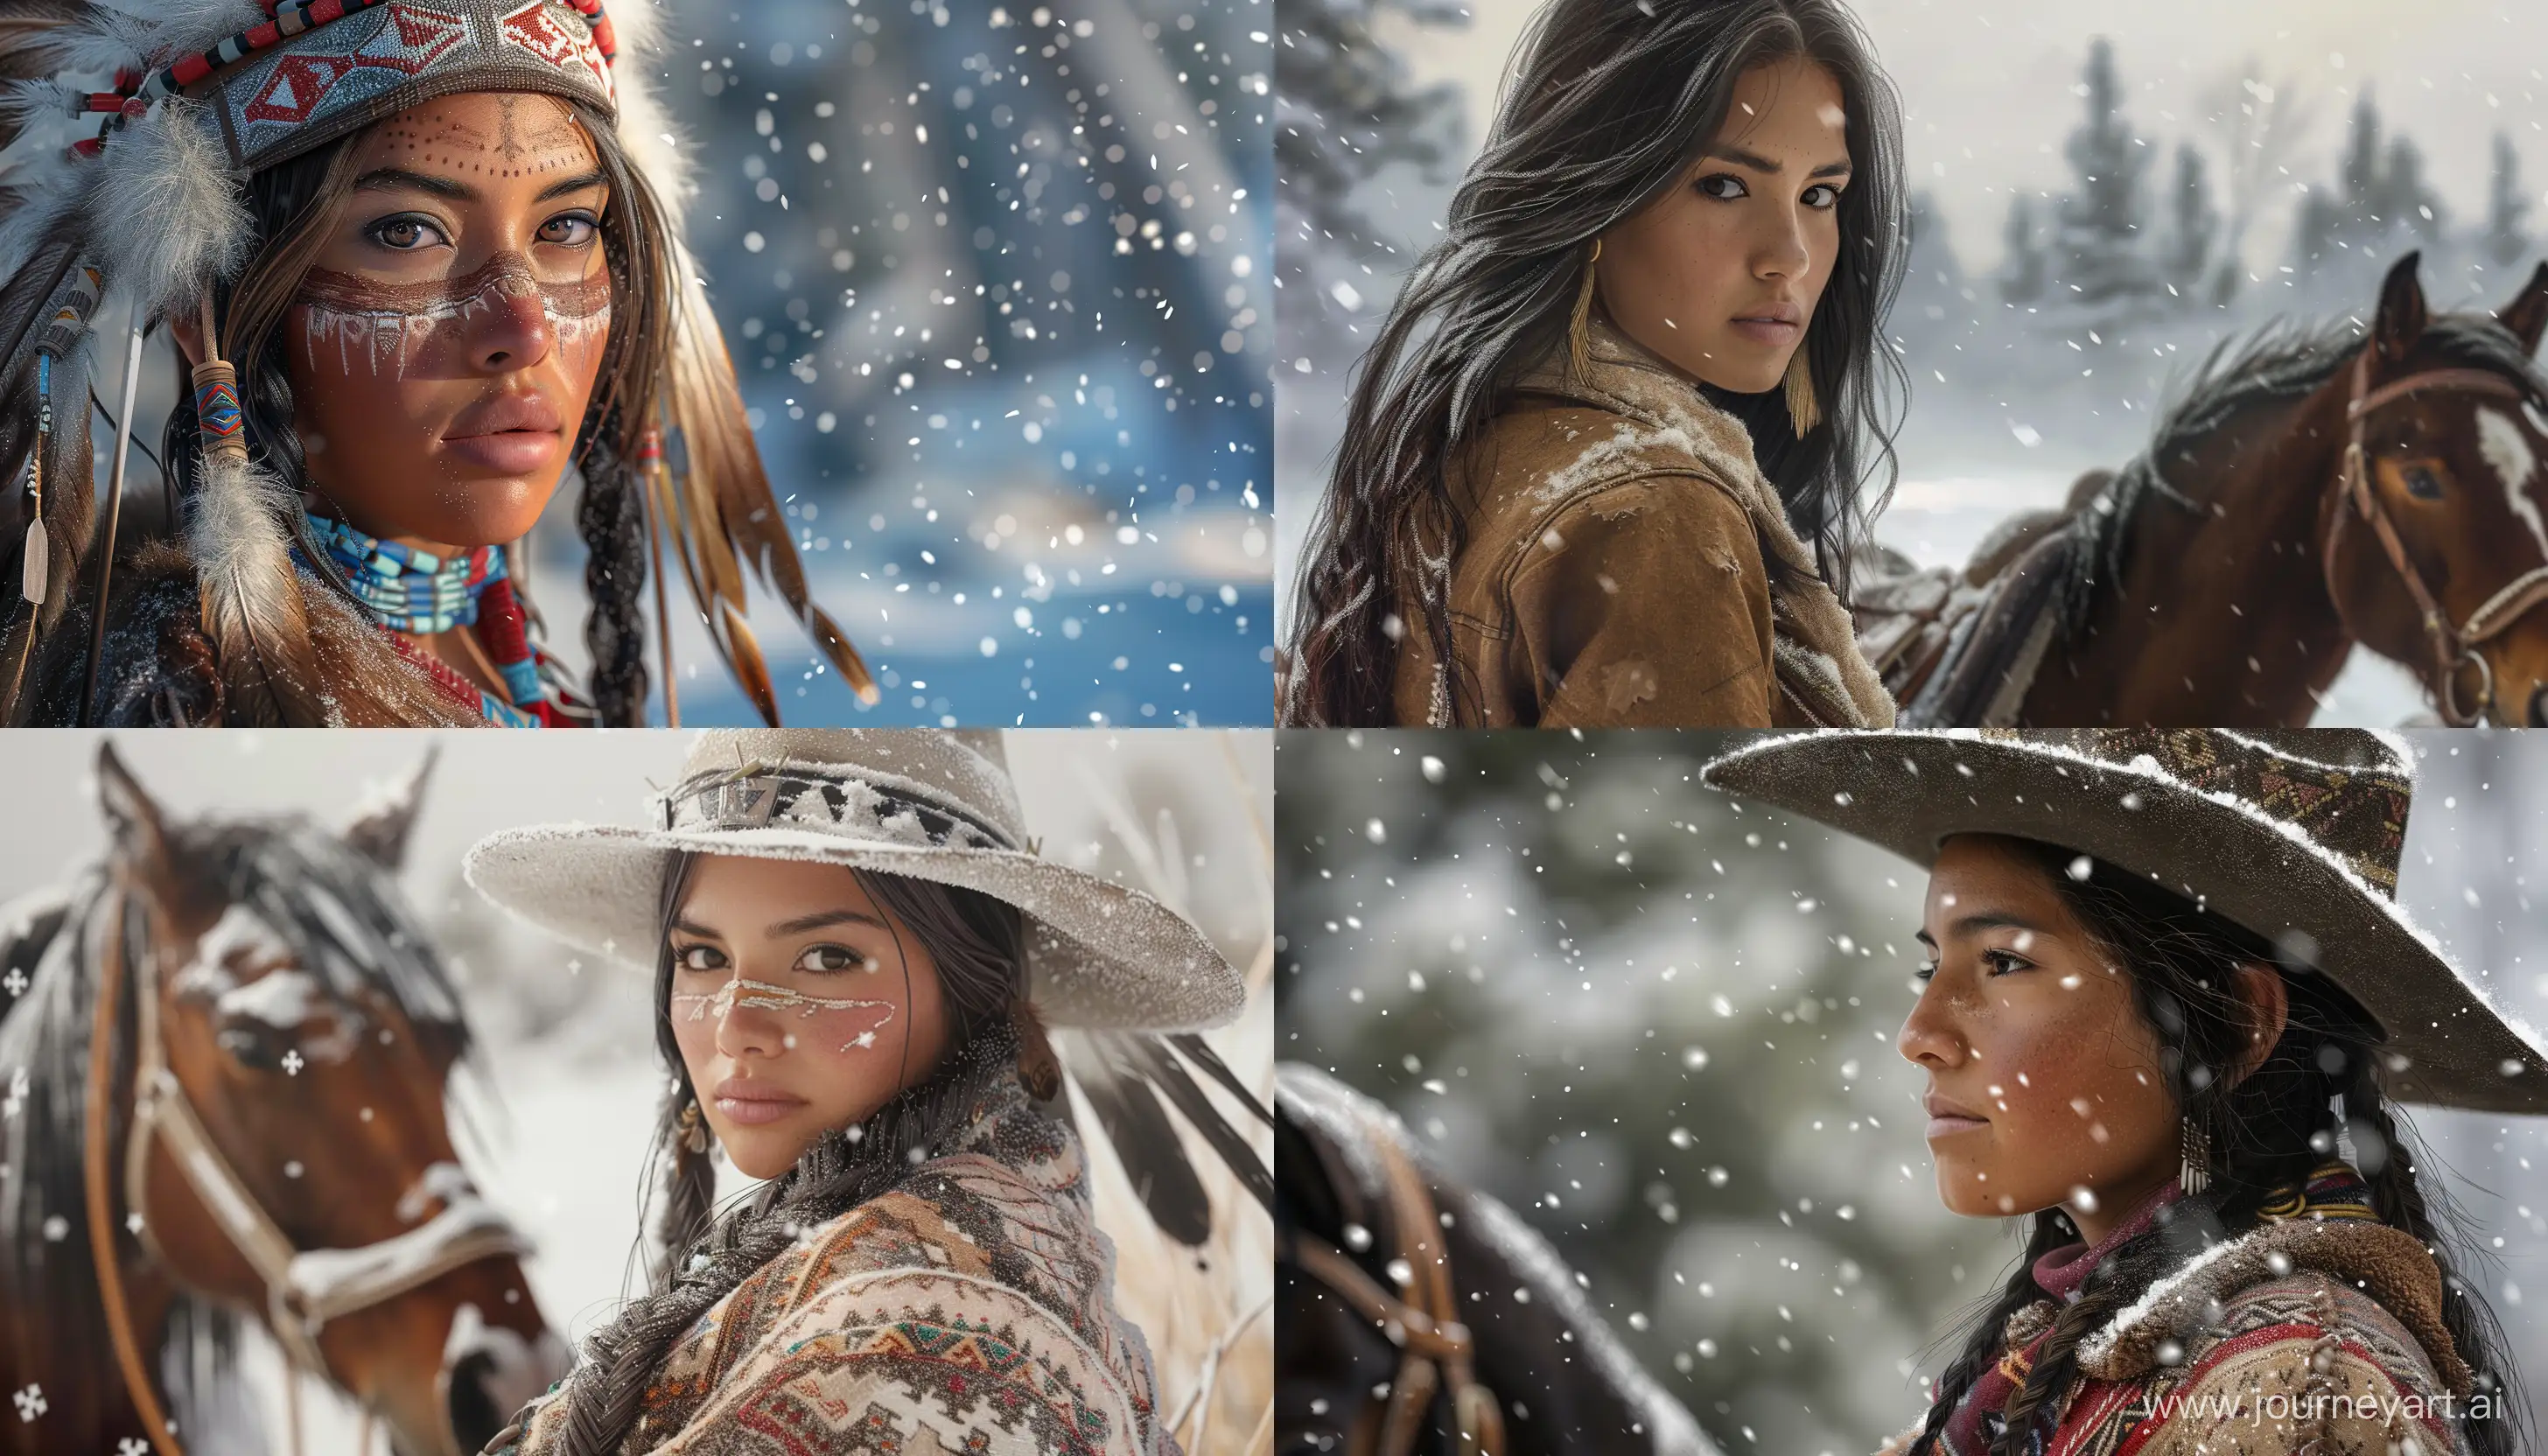 Detailed-Native-American-Woman-Riding-Horse-in-Snowy-Western-Landscape